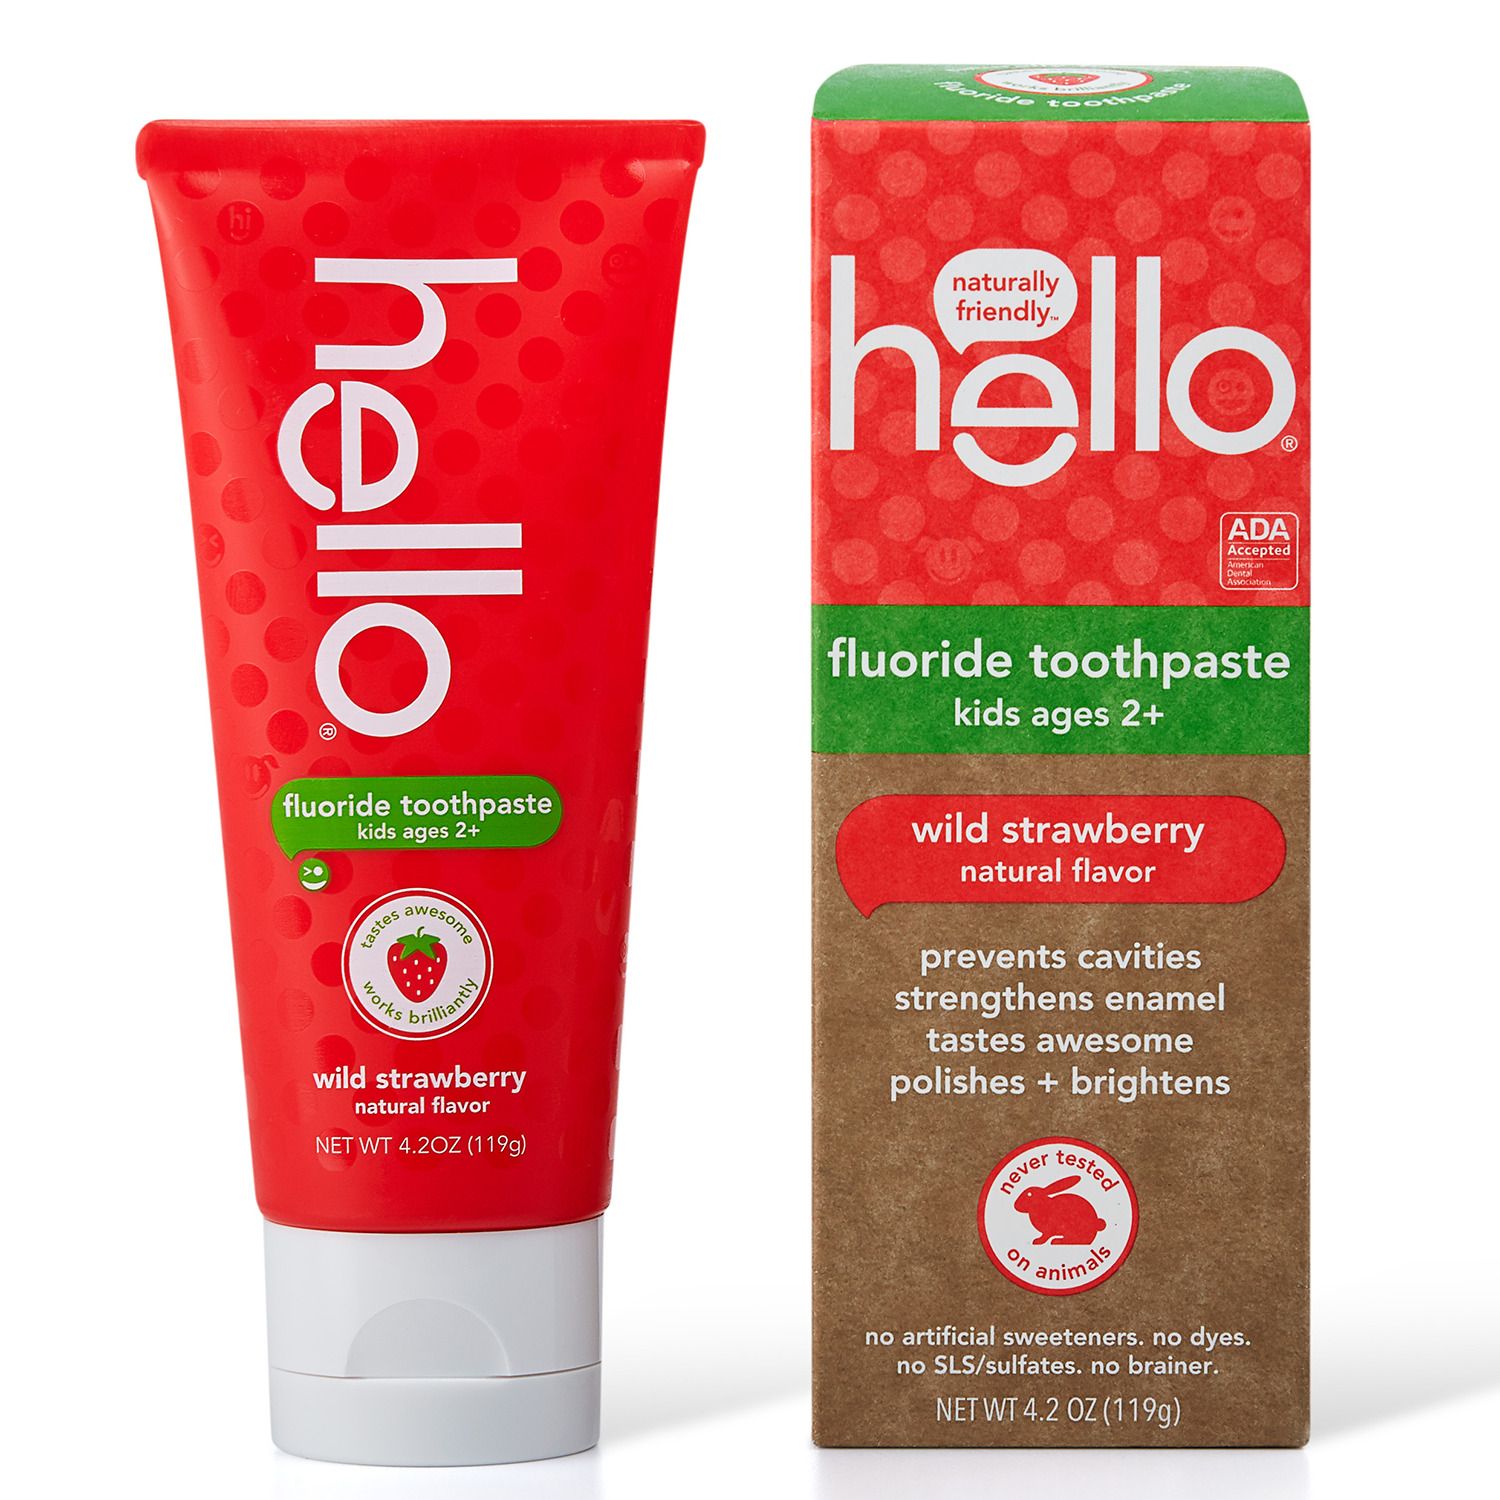 Image for hello Natural Wild Strawberry Fluoride Toothpaste at Kohl's.